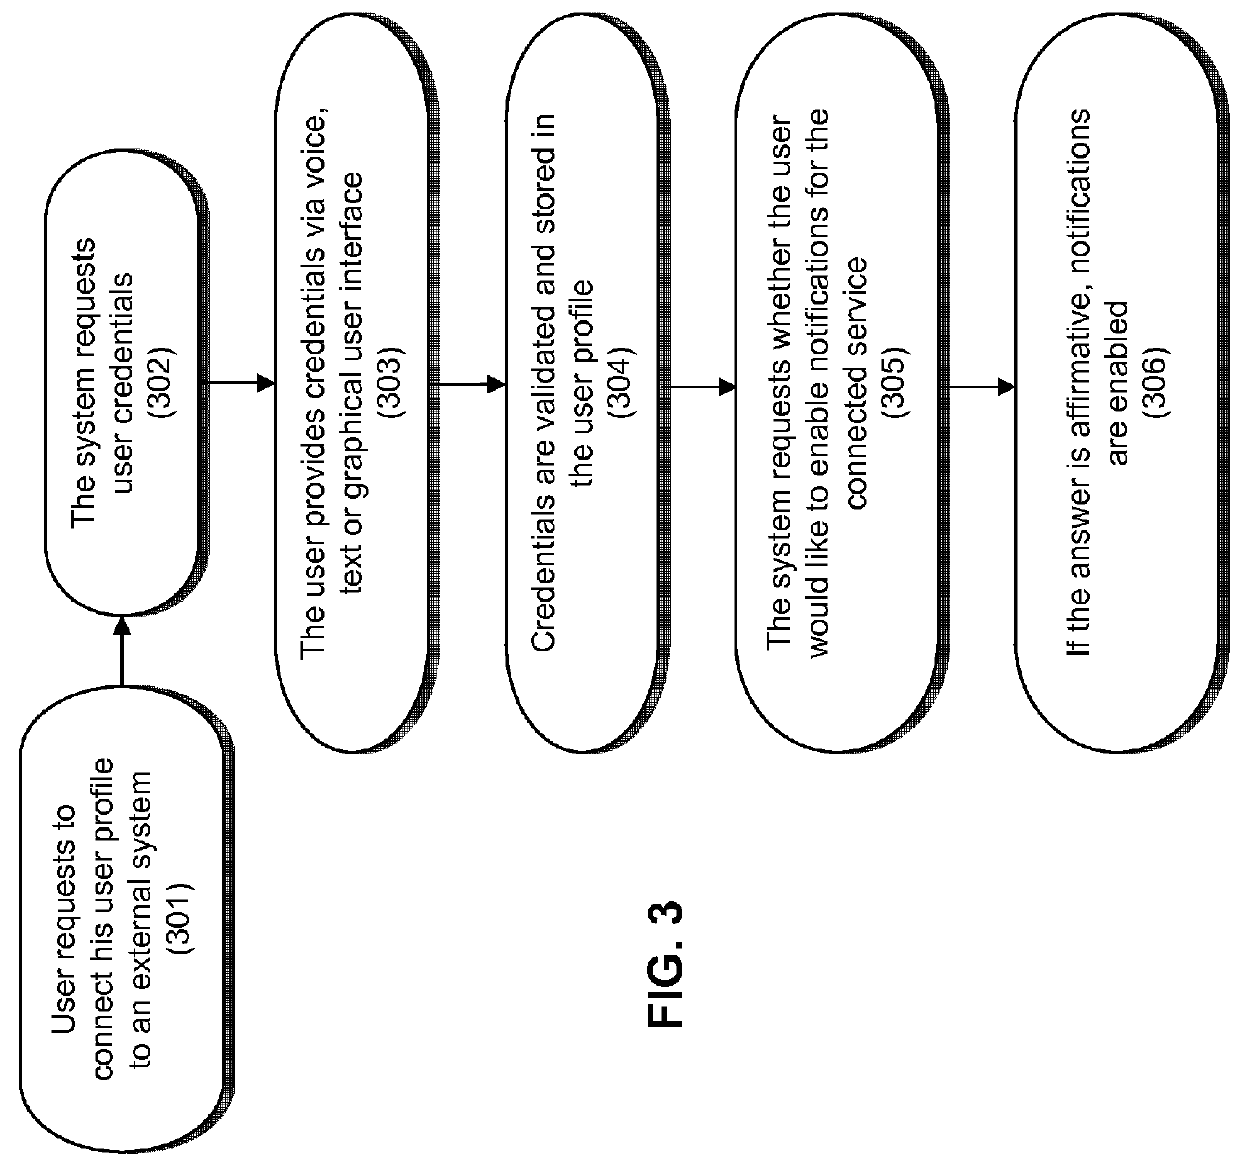 System-initiated interactions and notifications in a chat information system on mobile devices